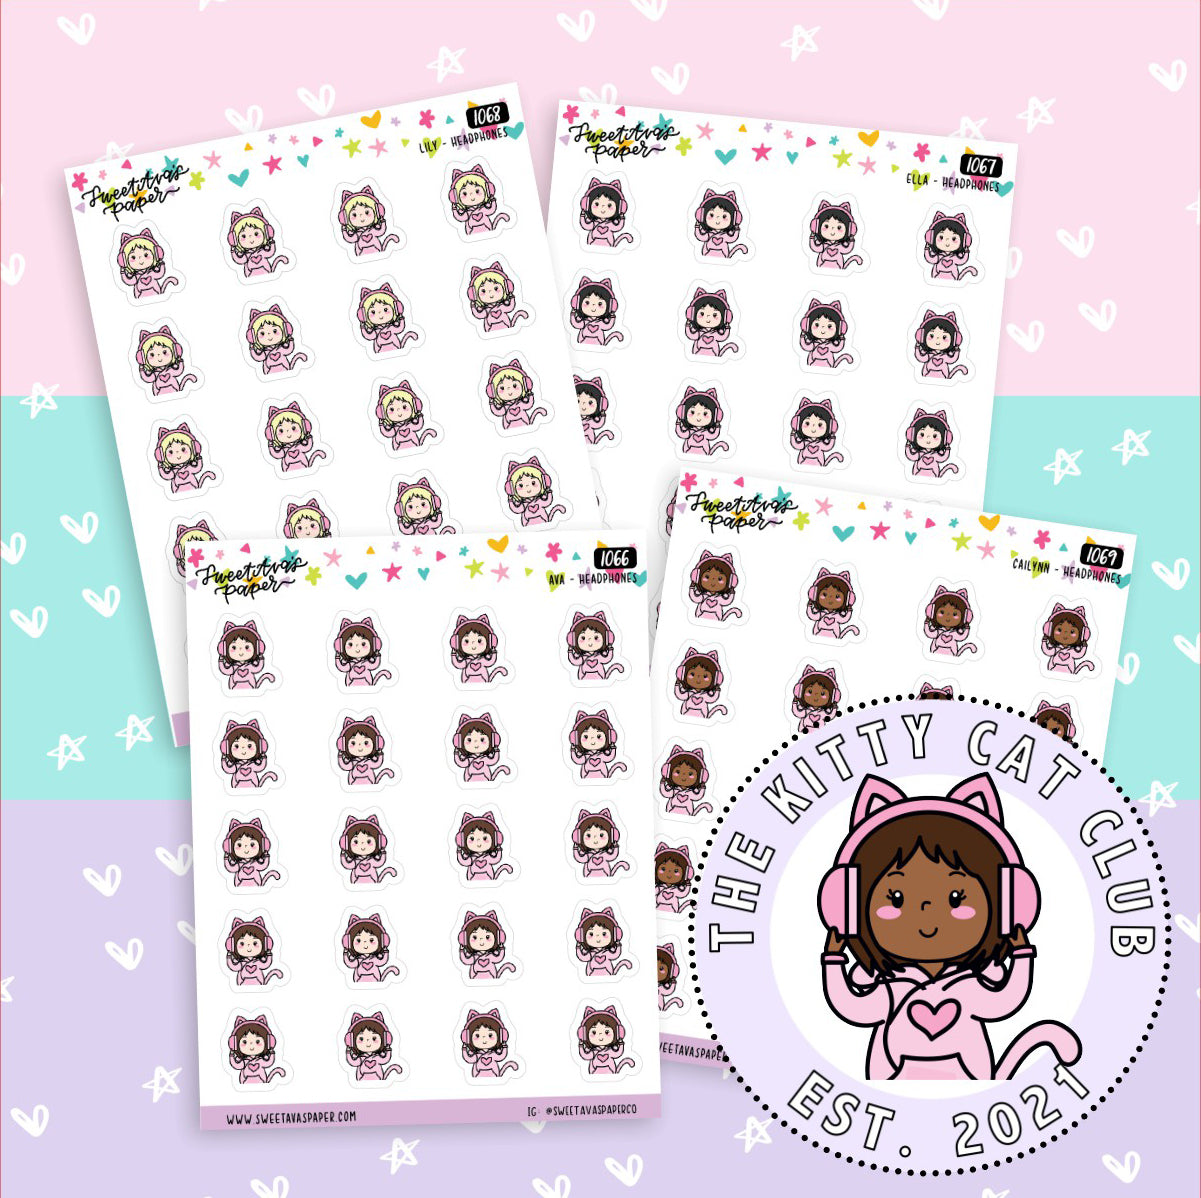 Headphones Planner Stickers - The Kitty Cat Club